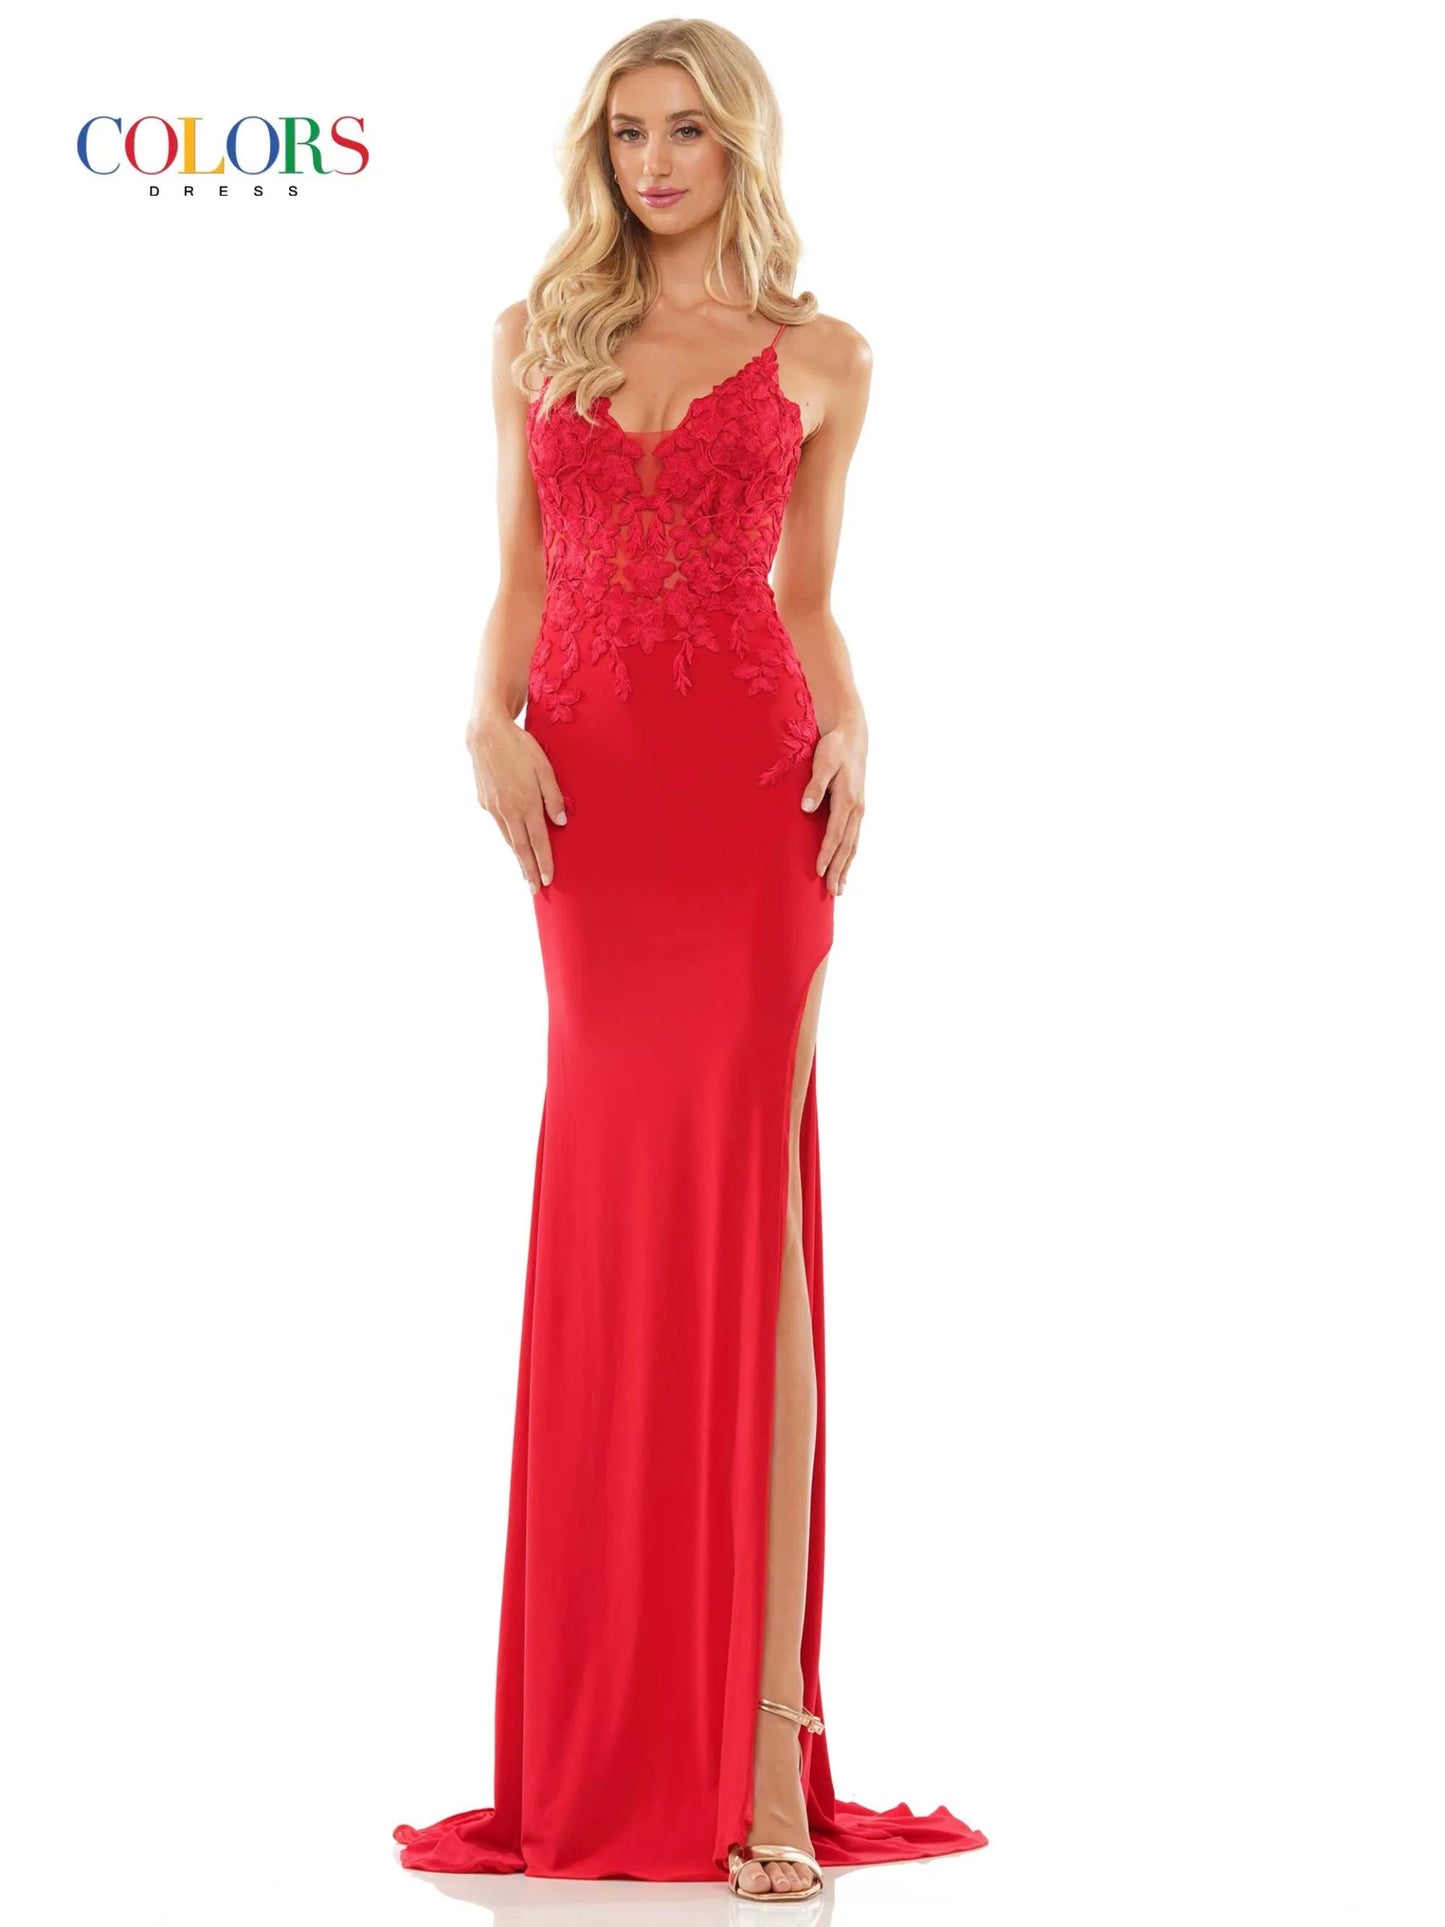 Expertly crafted for a flawless fit, the Colors Dress G1086 is a stunning Prom Dress that will make you stand out from the rest. The corset and lace bodice accentuate your curves, while the high slit adds a touch of elegance. Made of Matte Jersey, this formal pageant gown offers both comfort and style.